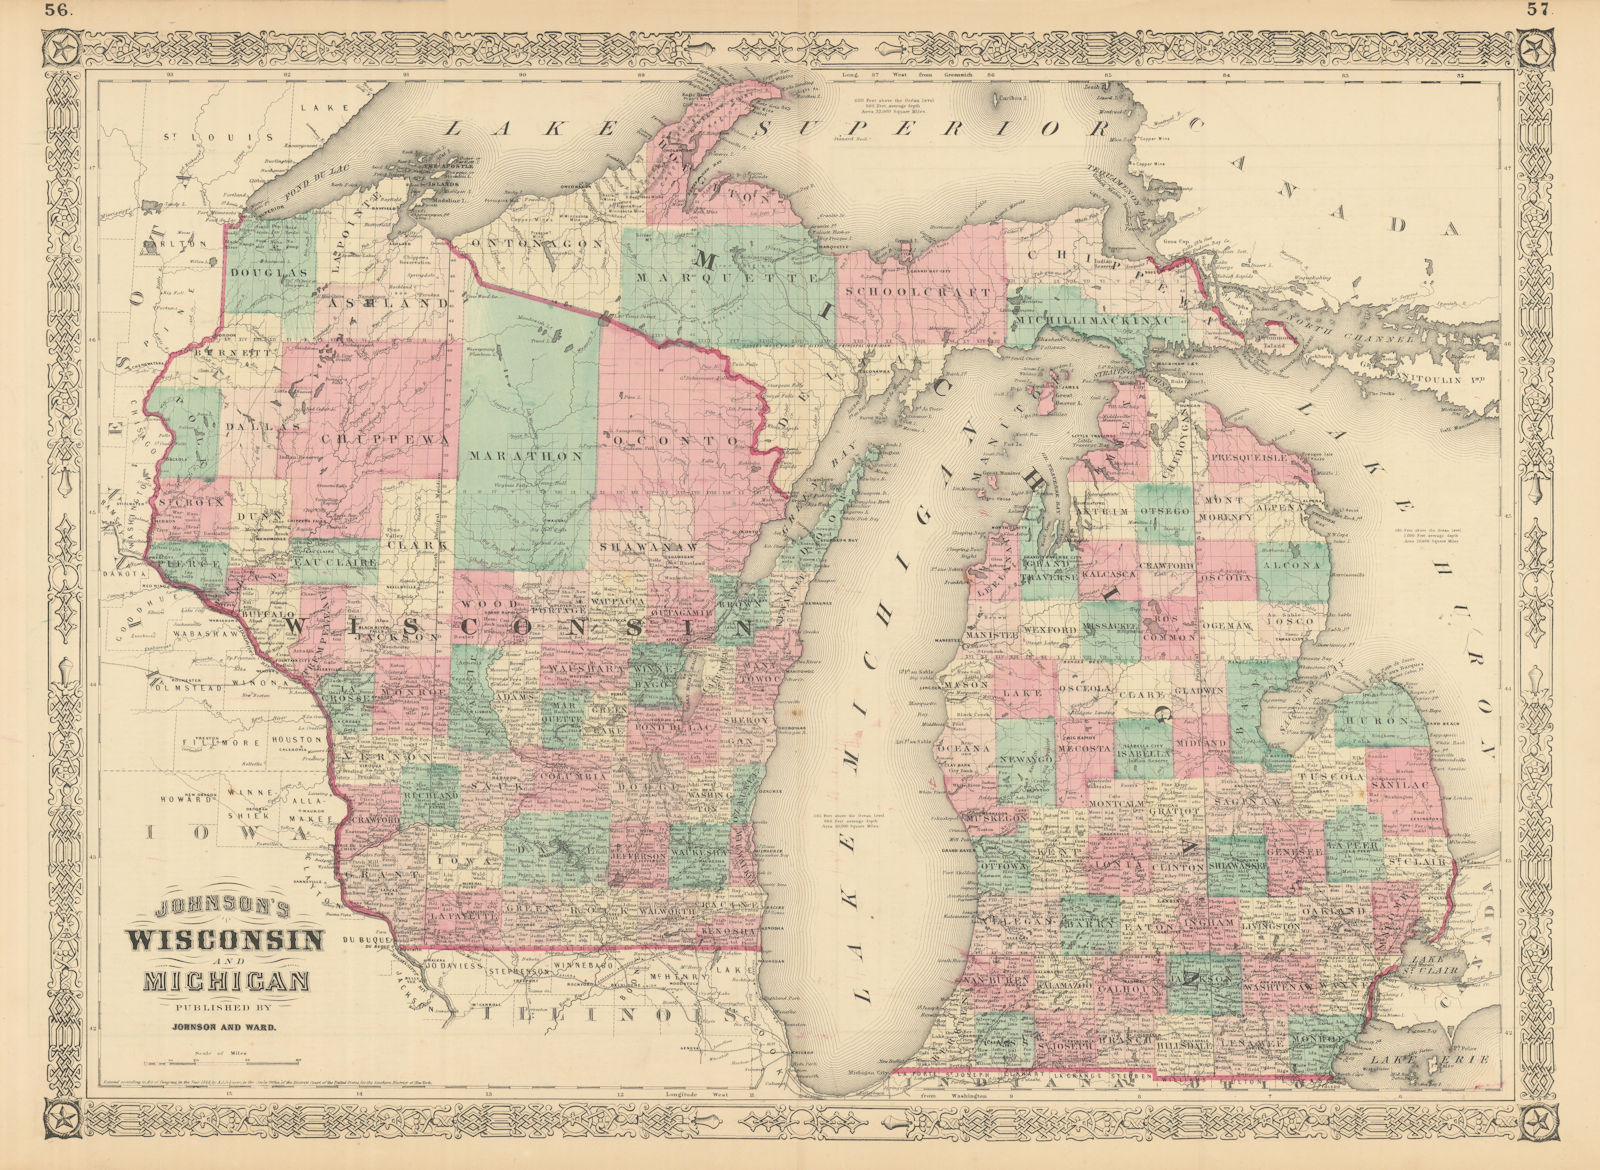 Johnson's Wisconsin & Michigan. State map showing counties. Great Lakes 1866